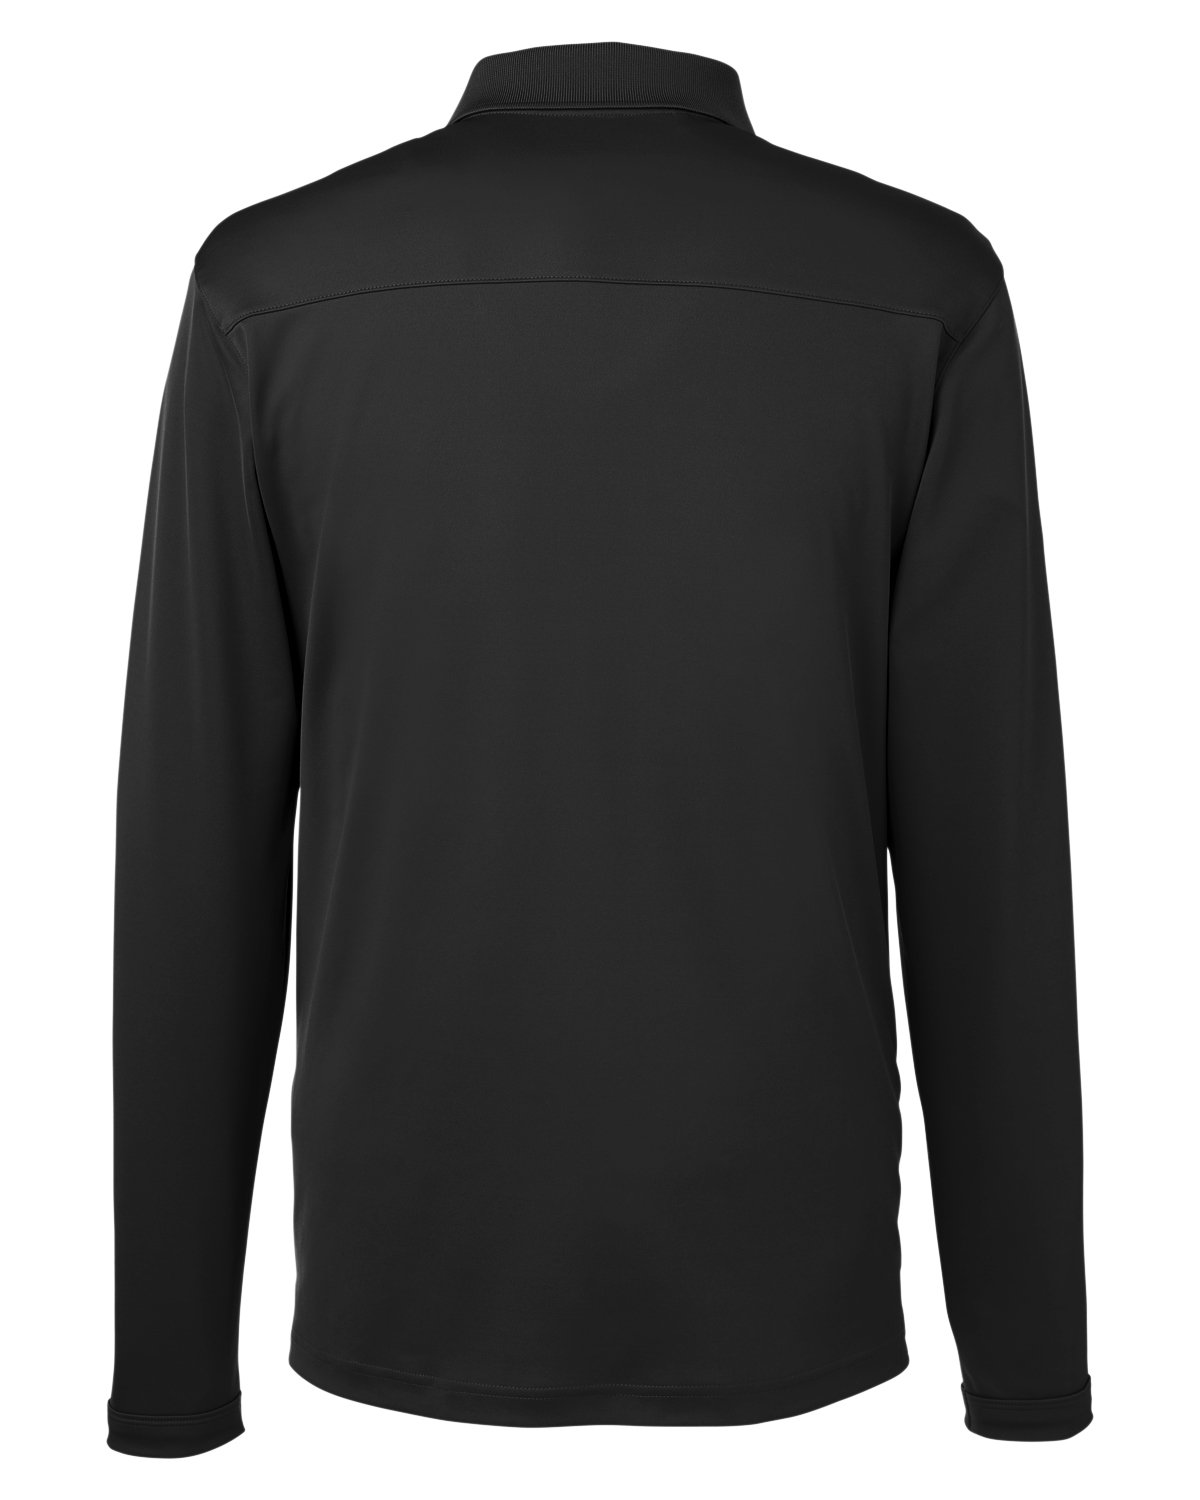 Under Armour Men's Corporate Long-Sleeve Performance Polo | alphabroder